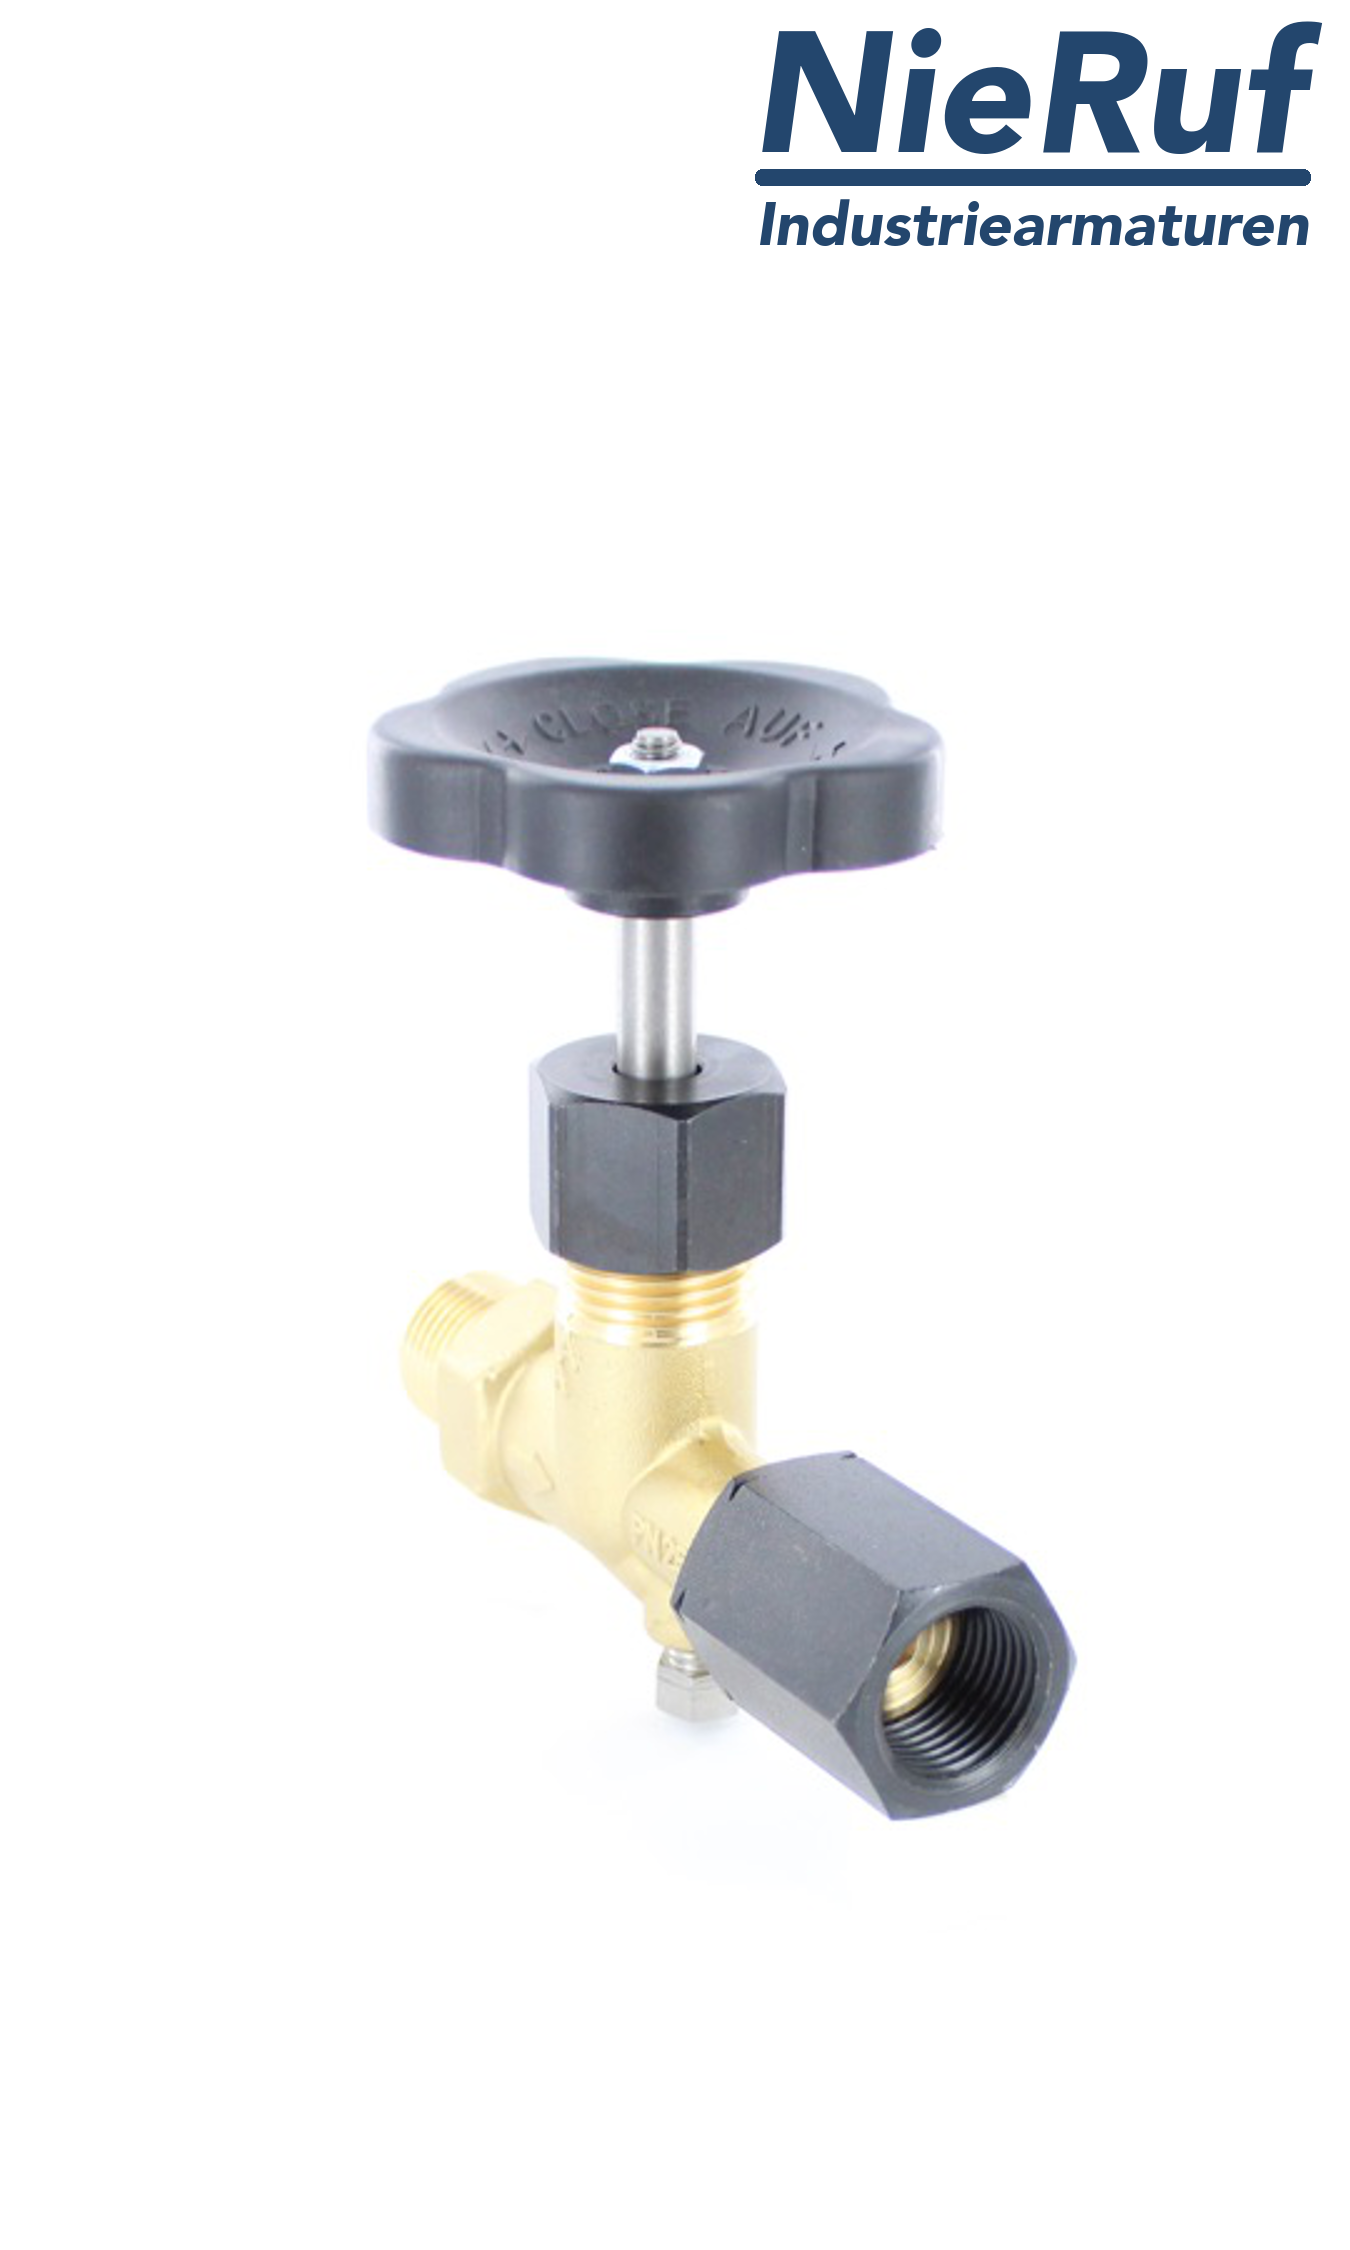 manometer gauge valves brass with 1/2" connection